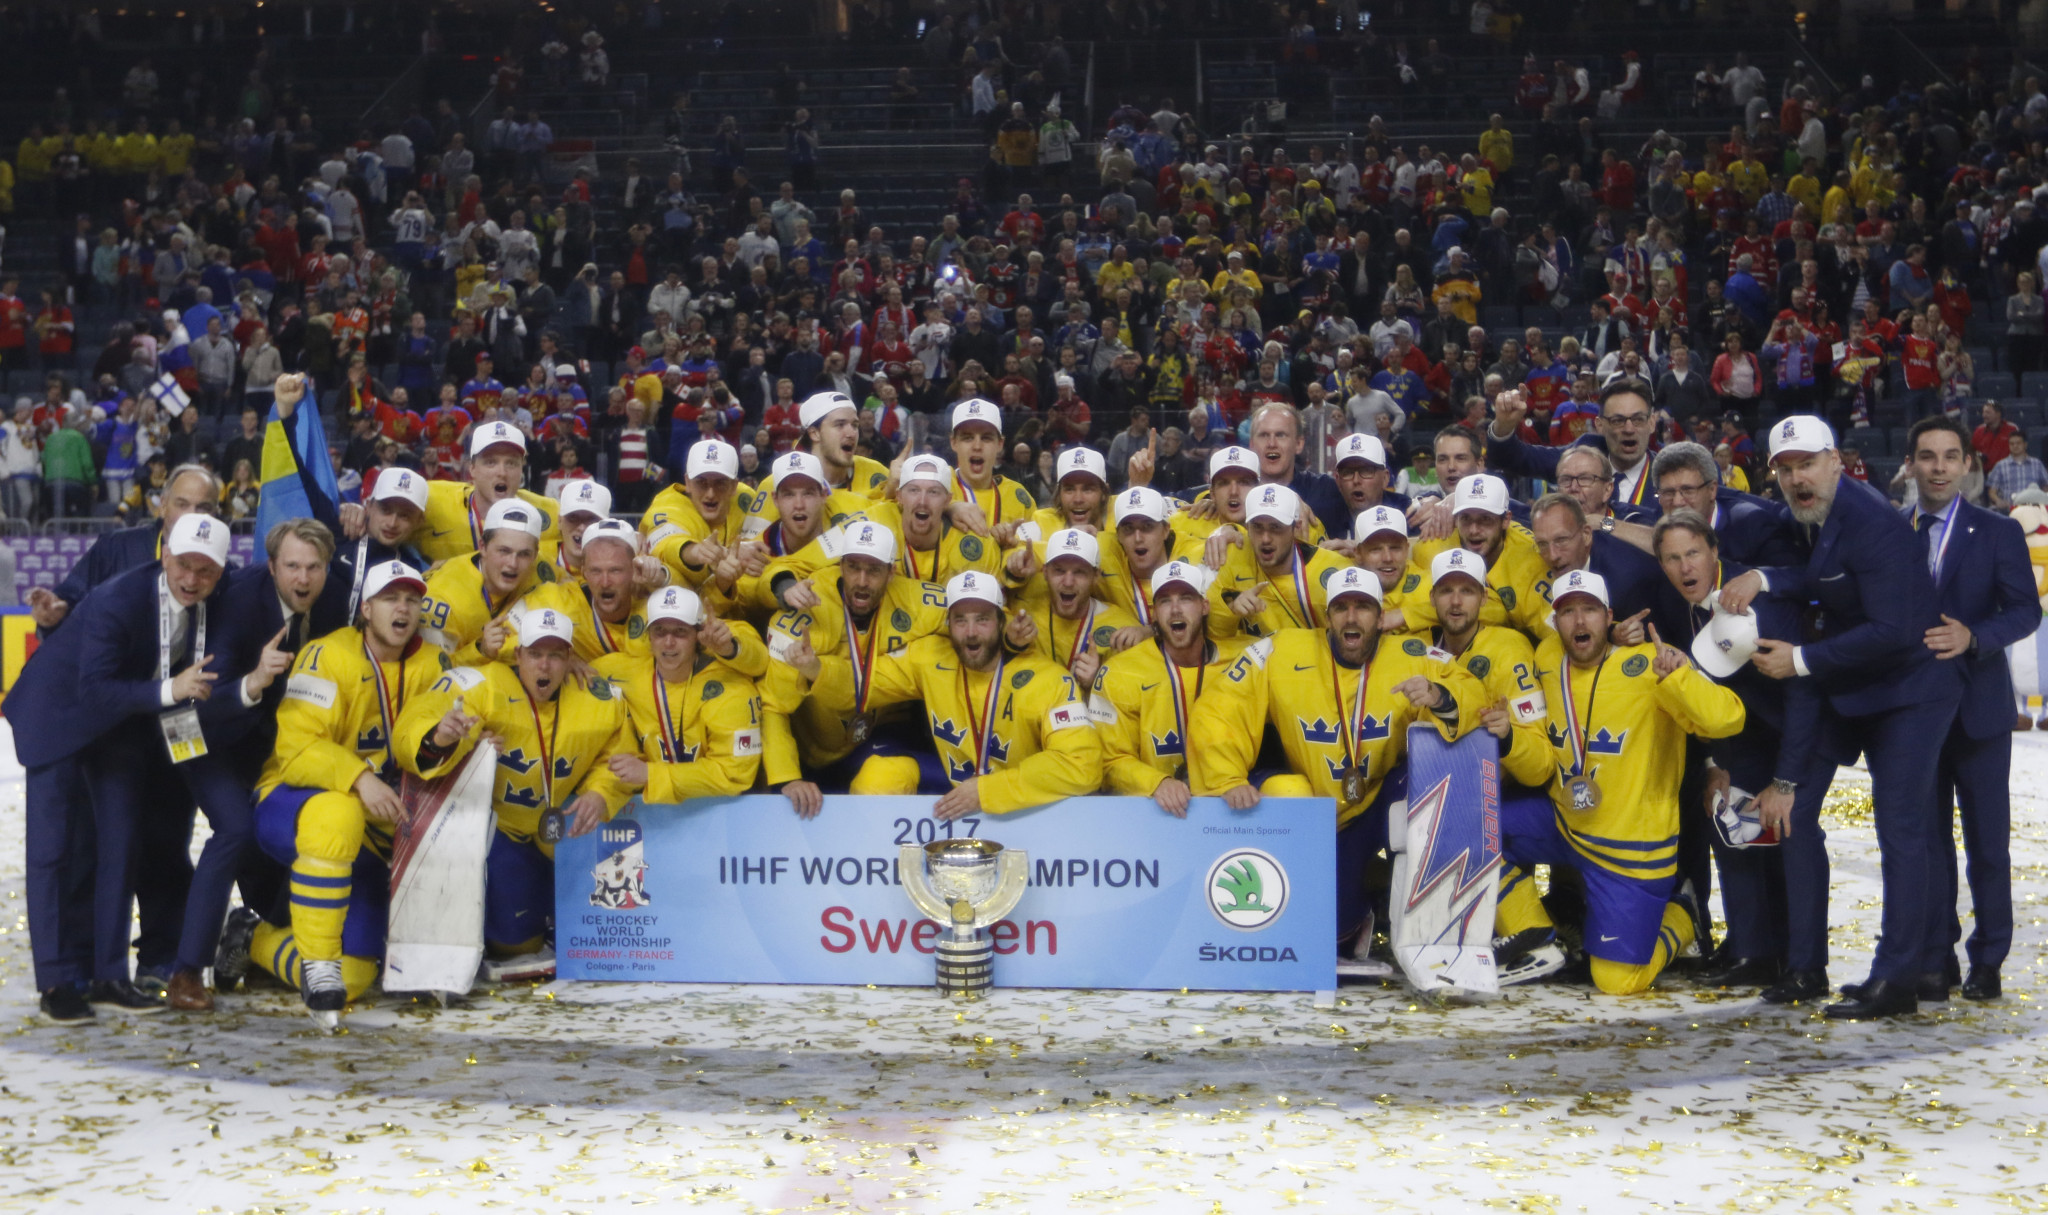 Record-breaking television coverage and viewership figures for 2017 IIHF Ice Hockey World Championship